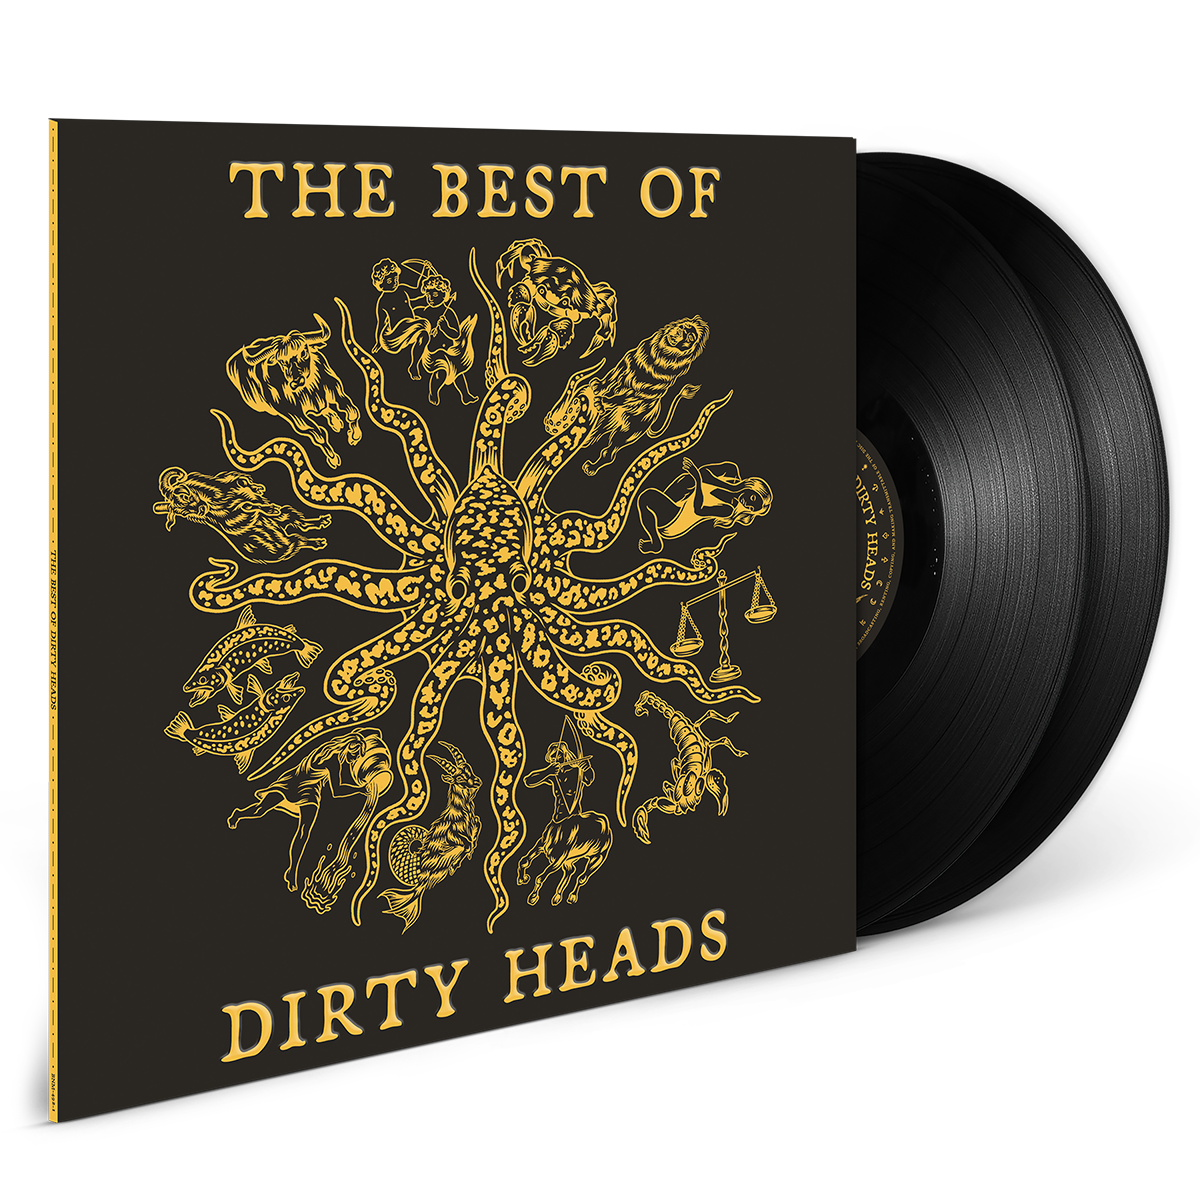 The Best of Dirty Heads 2xLP - Black